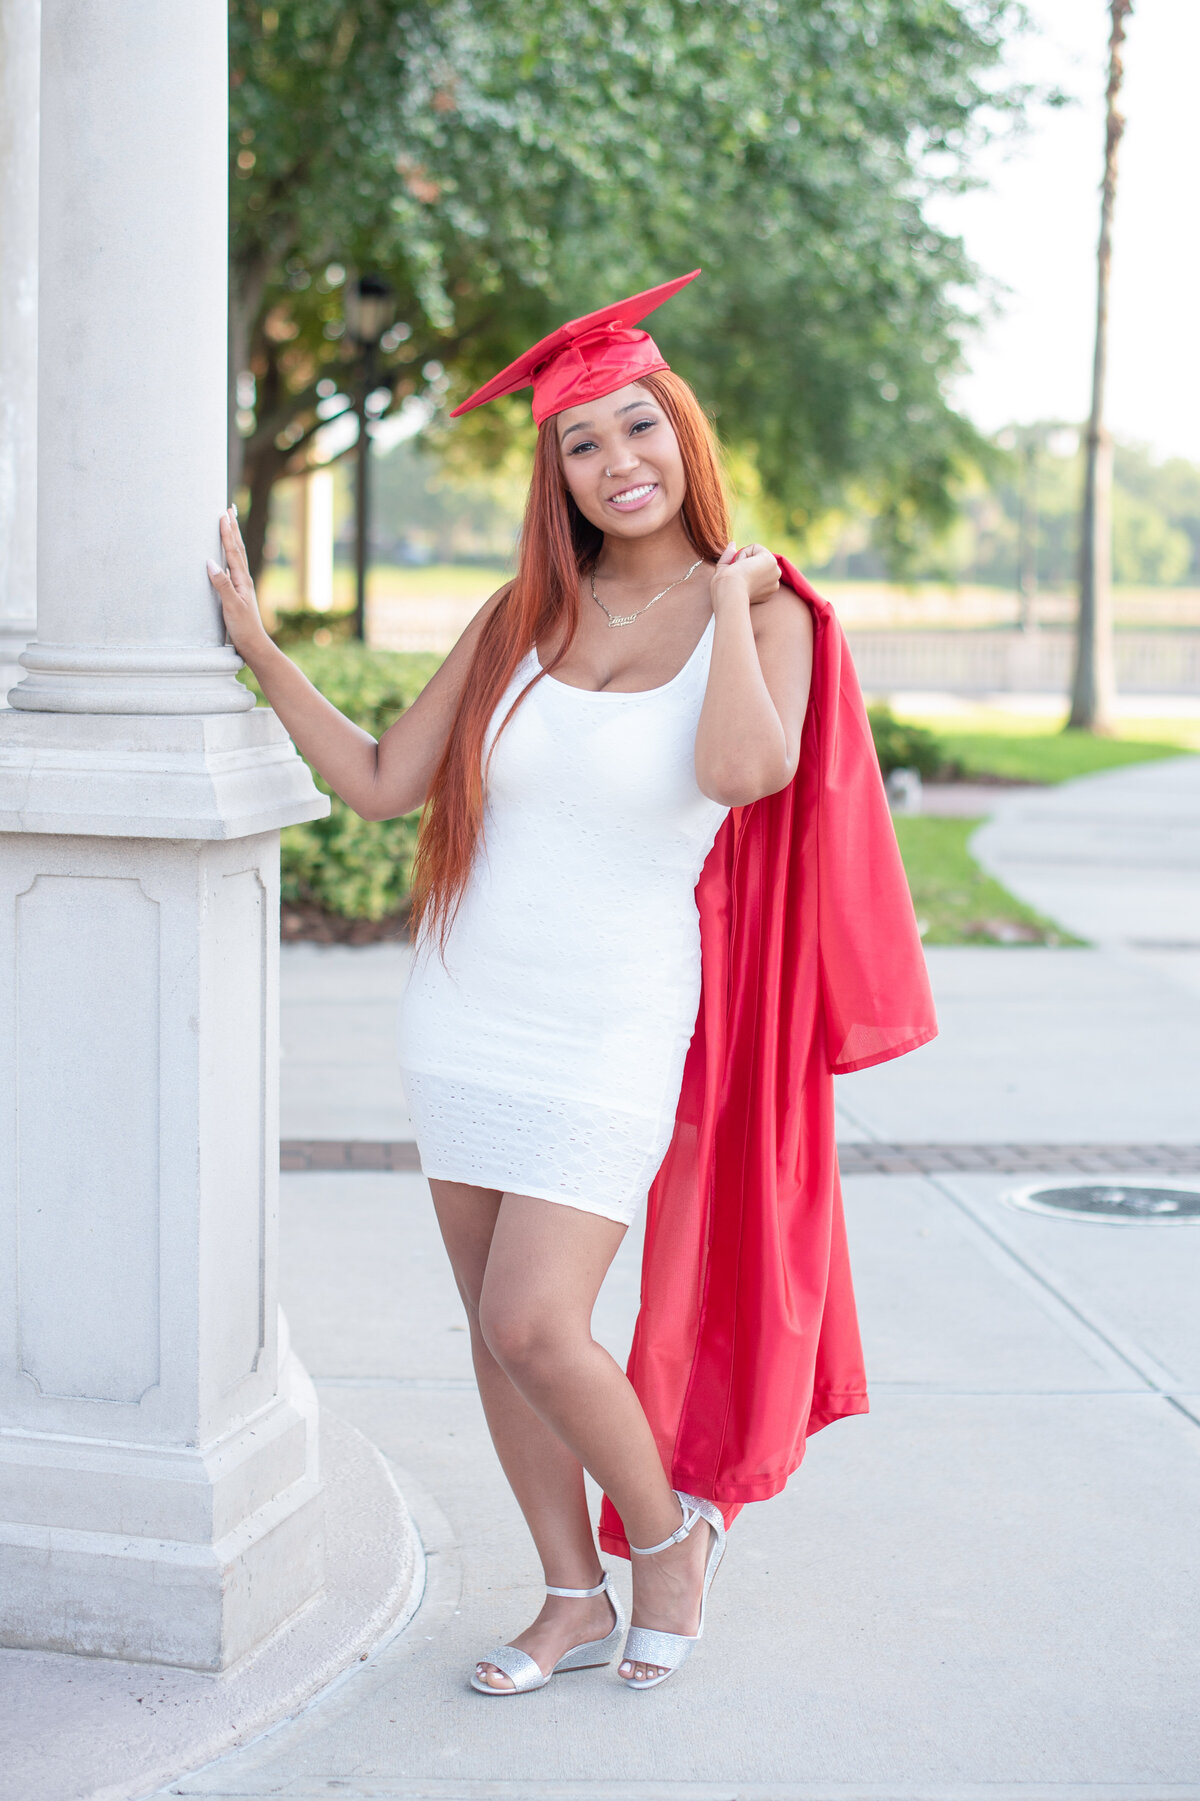 High school senior girl wearing cap holding gown over shoulder posing with pillar.